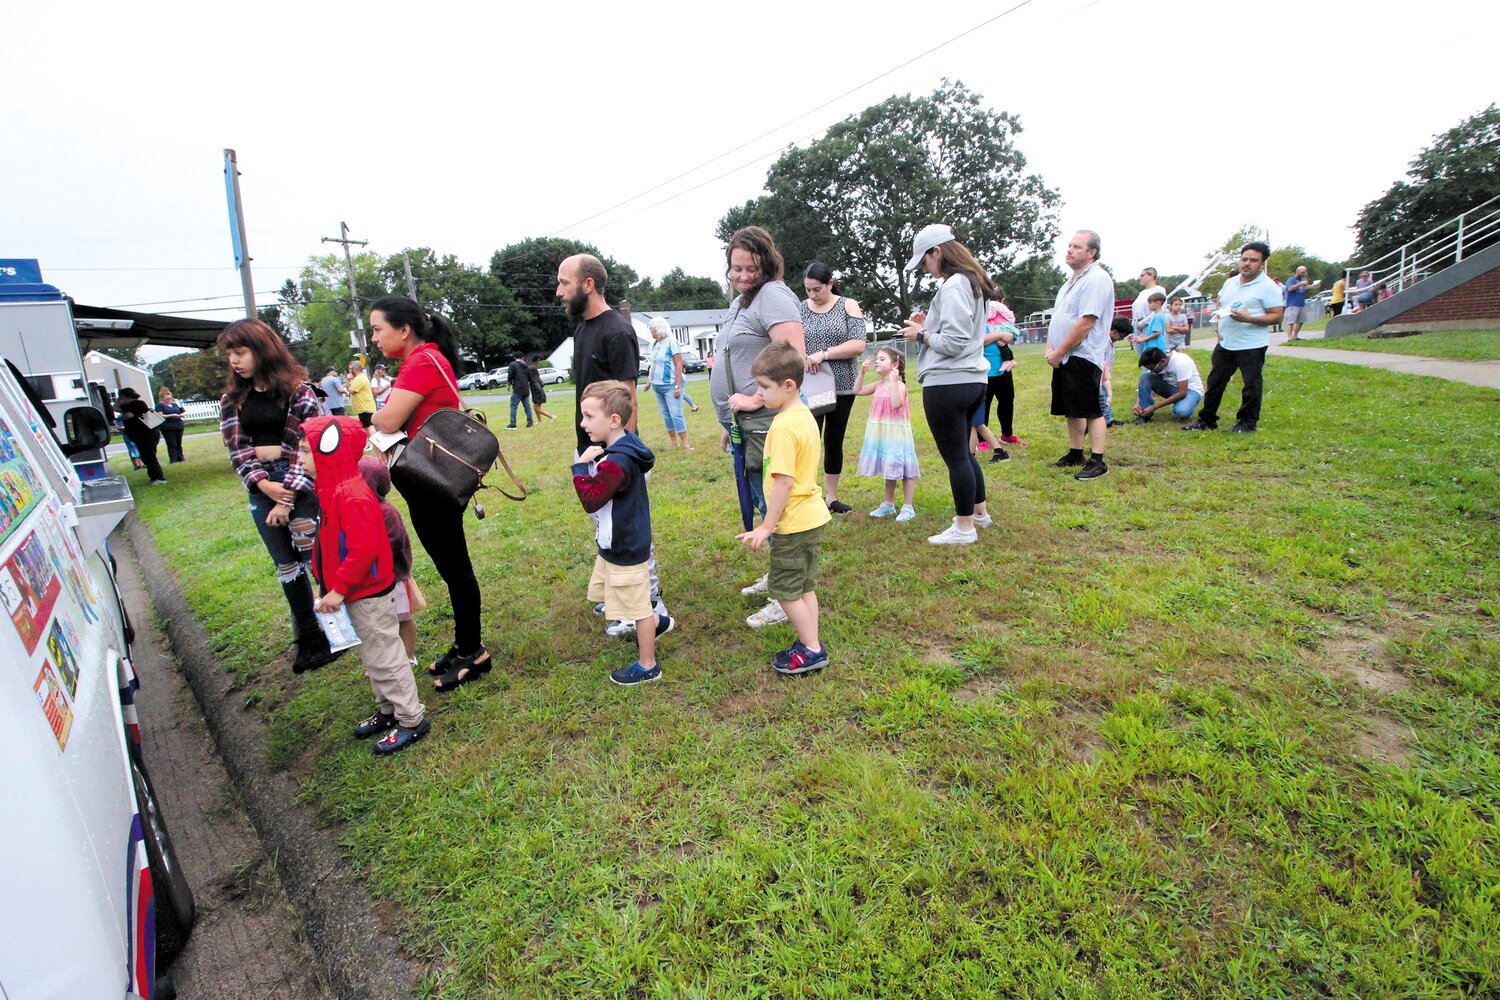 Parents and students line up for a sweet start to the school year at Kay’s Ice Cream truck during the Oakland Beach School open house and bash held Tuesday at Gorton where classes will be held this year. (Warwick Beacon photos)